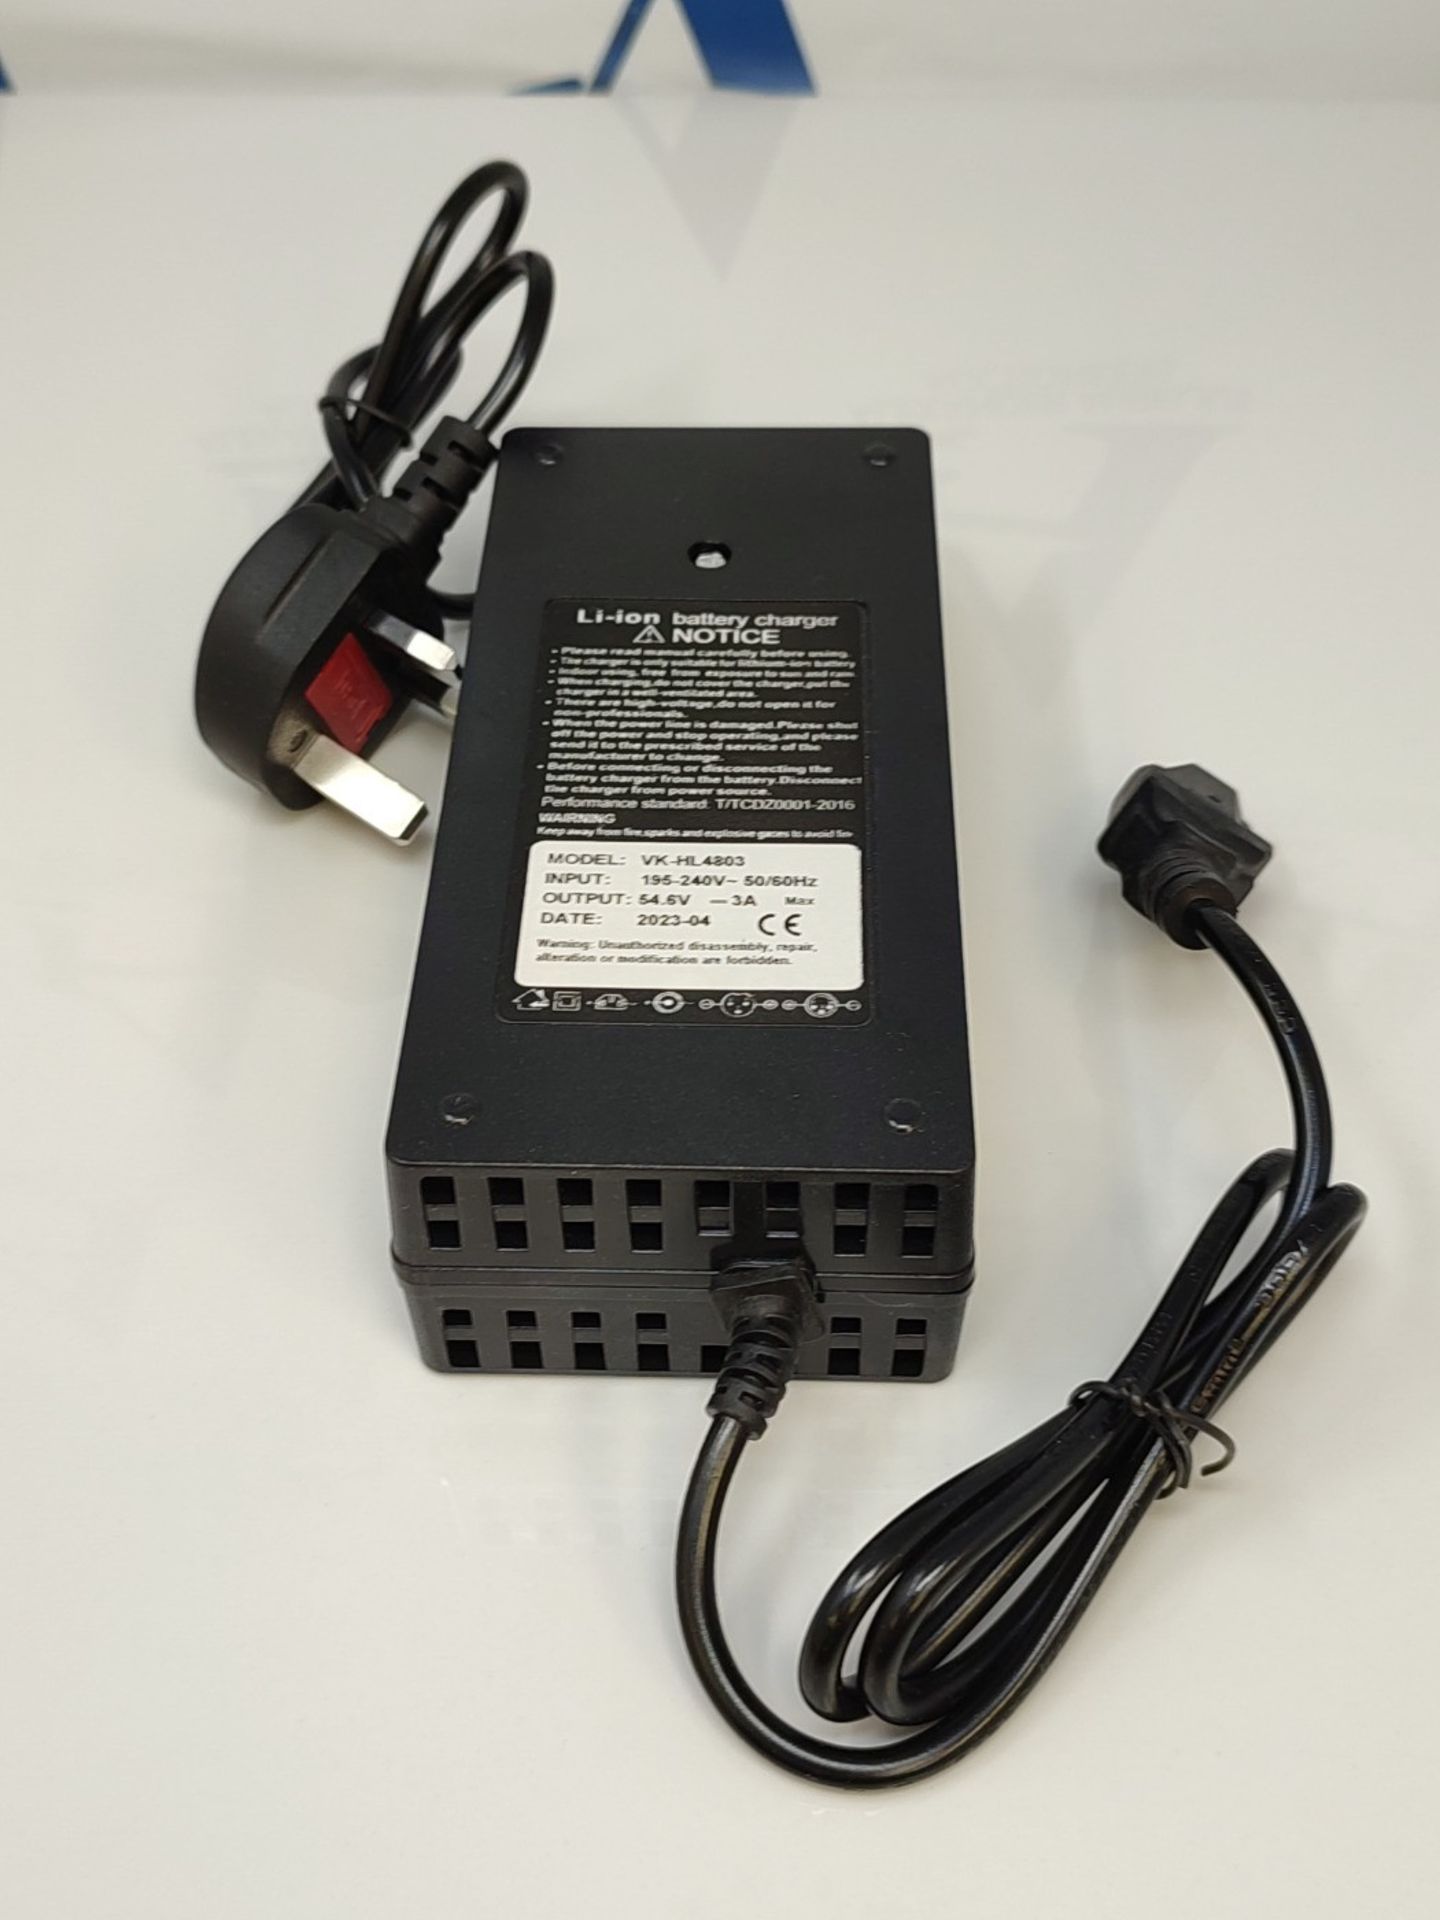 HSJCZMD Multi-specification Charger Power,42V/1.8Alithium Battery Charger,7 Kinds of P - Image 2 of 2